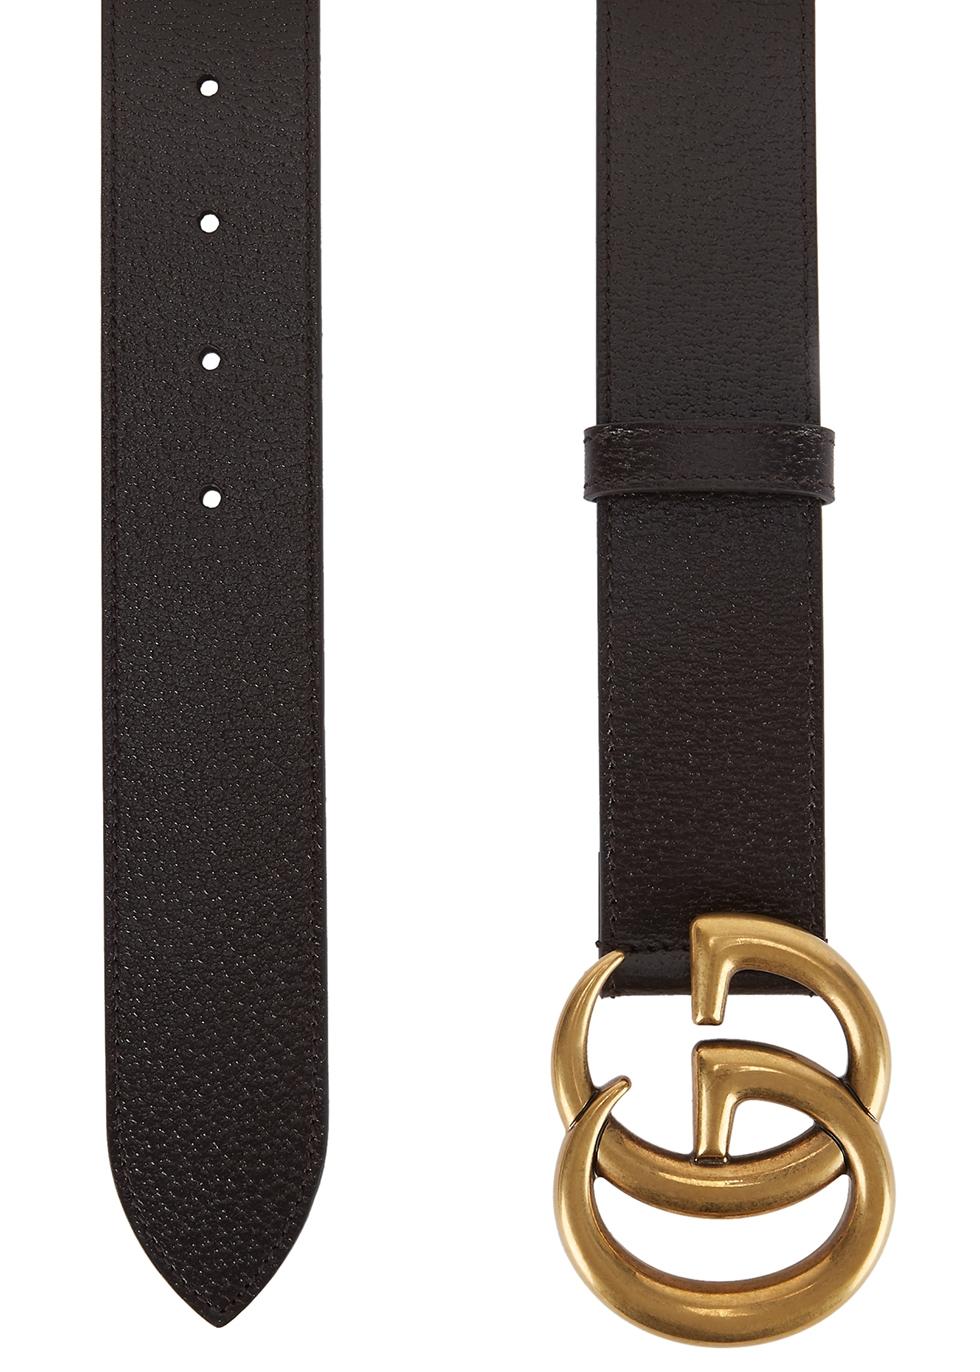 blacked out gucci belt